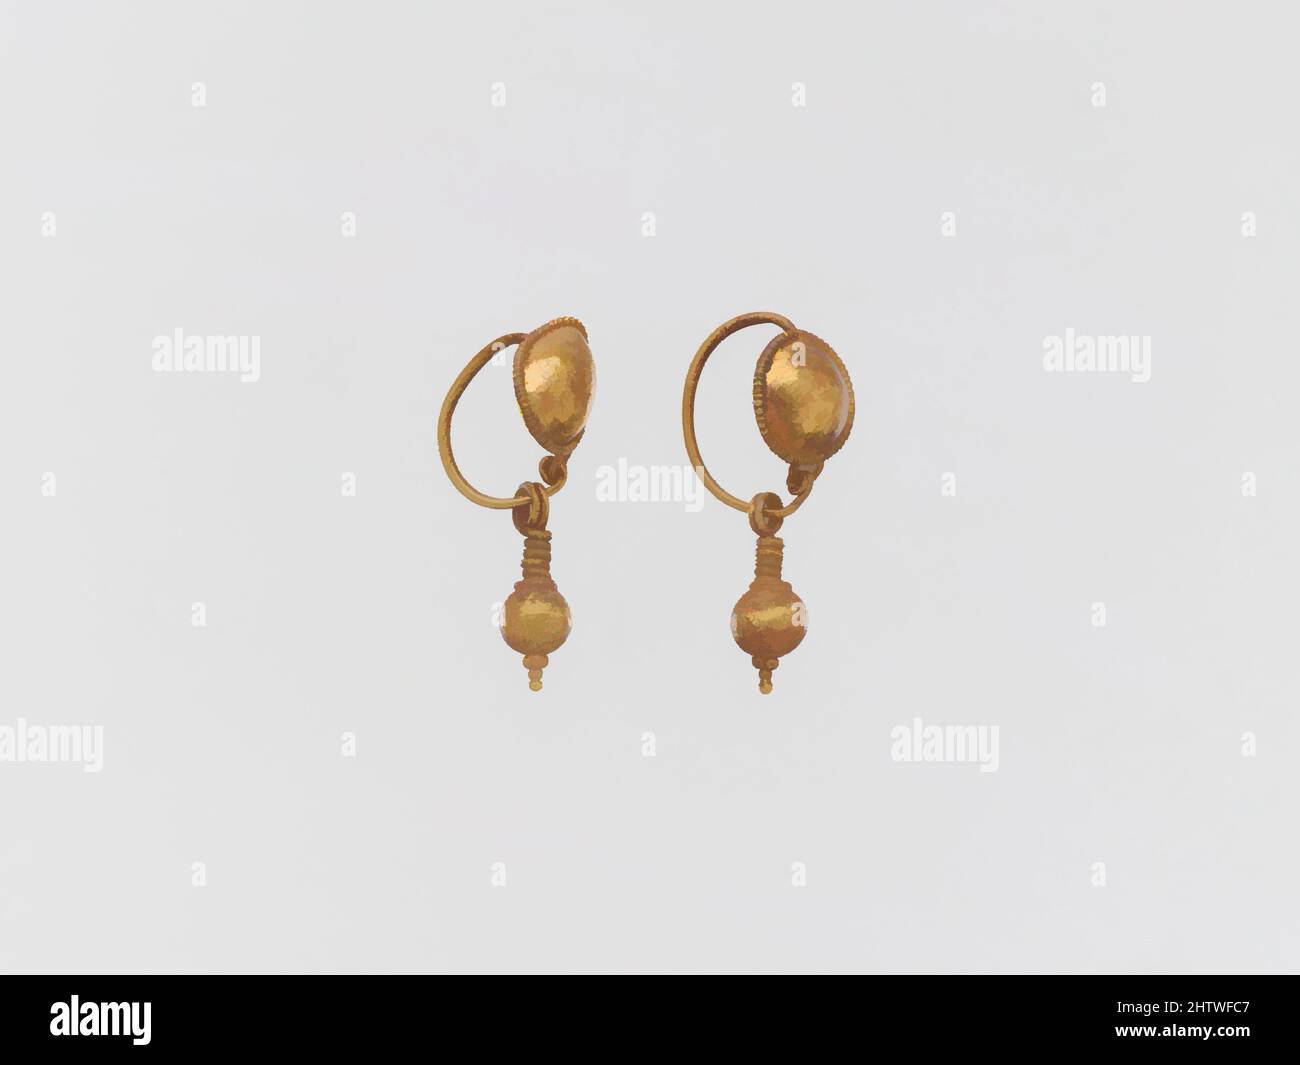 Art inspired by Earring with pendant, Gold, Other: 5/16 x 3/8 x 7/8 in. (0.8 x 1 x 2.3 cm), Gold and Silver, Classic works modernized by Artotop with a splash of modernity. Shapes, color and value, eye-catching visual impact on art. Emotions through freedom of artworks in a contemporary way. A timeless message pursuing a wildly creative new direction. Artists turning to the digital medium and creating the Artotop NFT Stock Photo